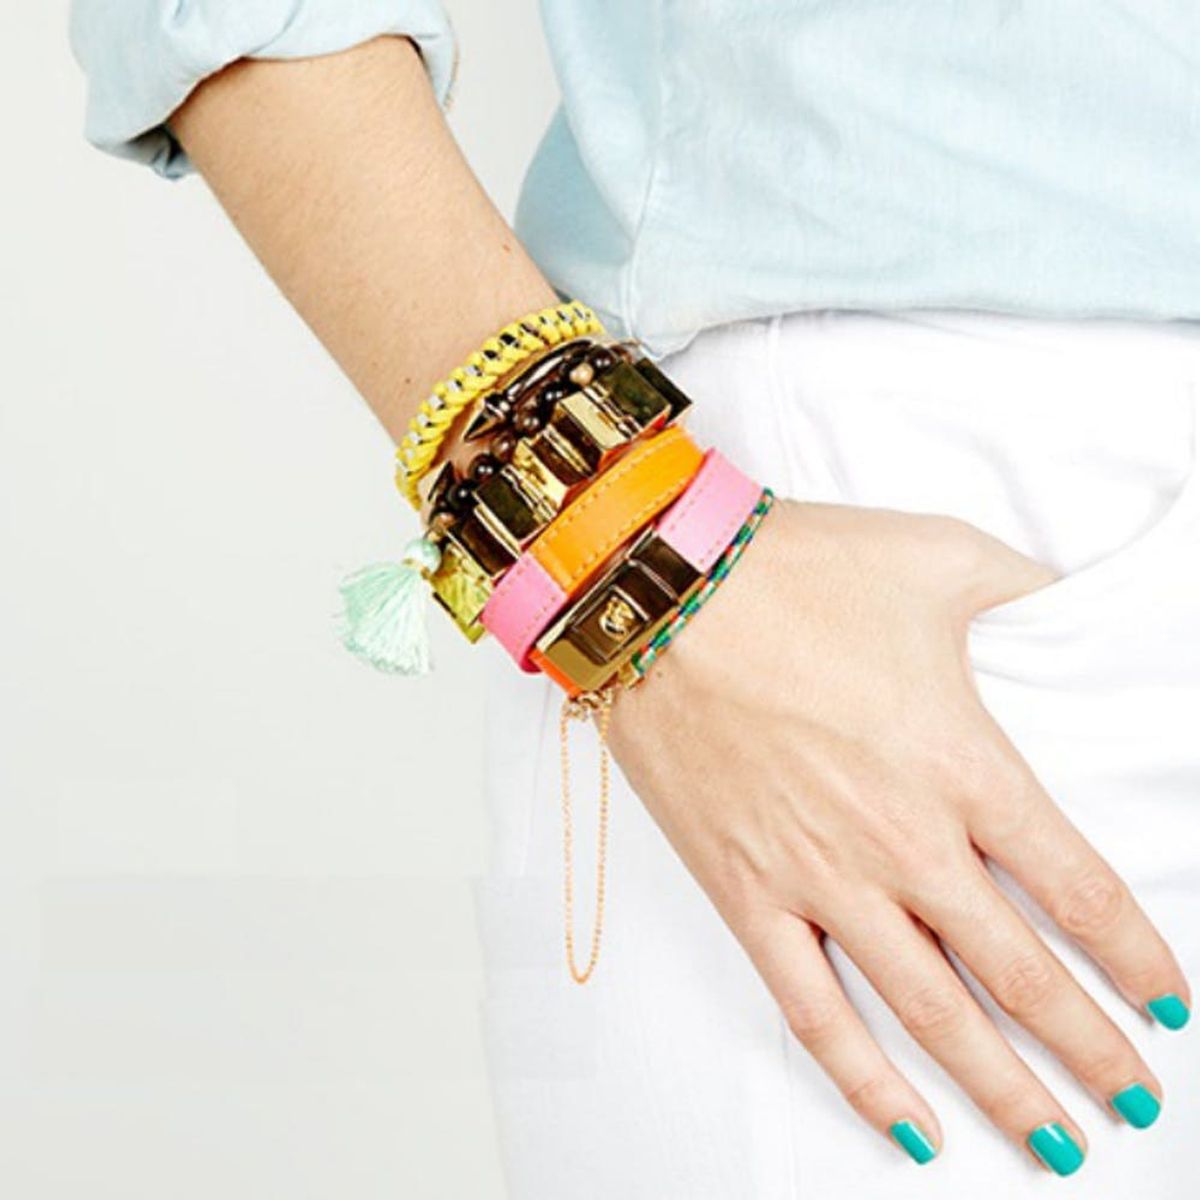 Stack ’em Up! 19 Bracelets to Add to Your Arm Party